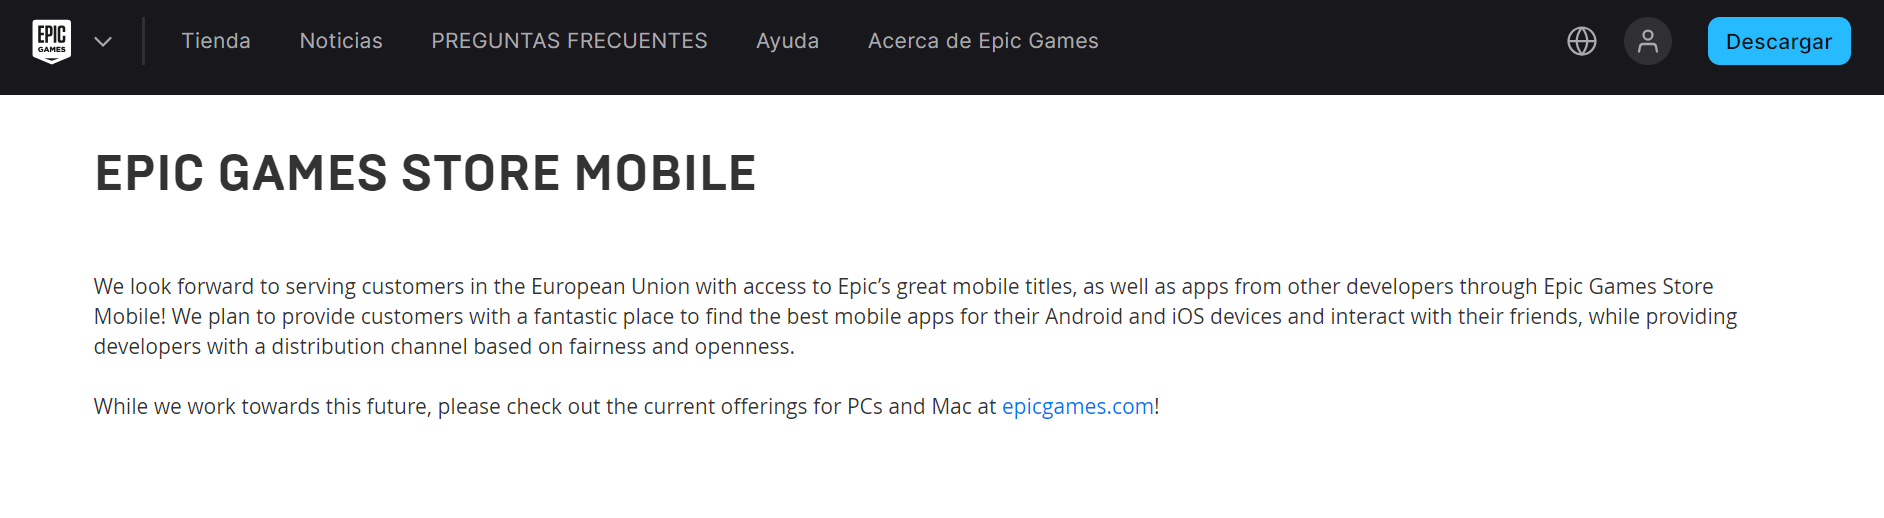 Epic Game Store Mobile für Android